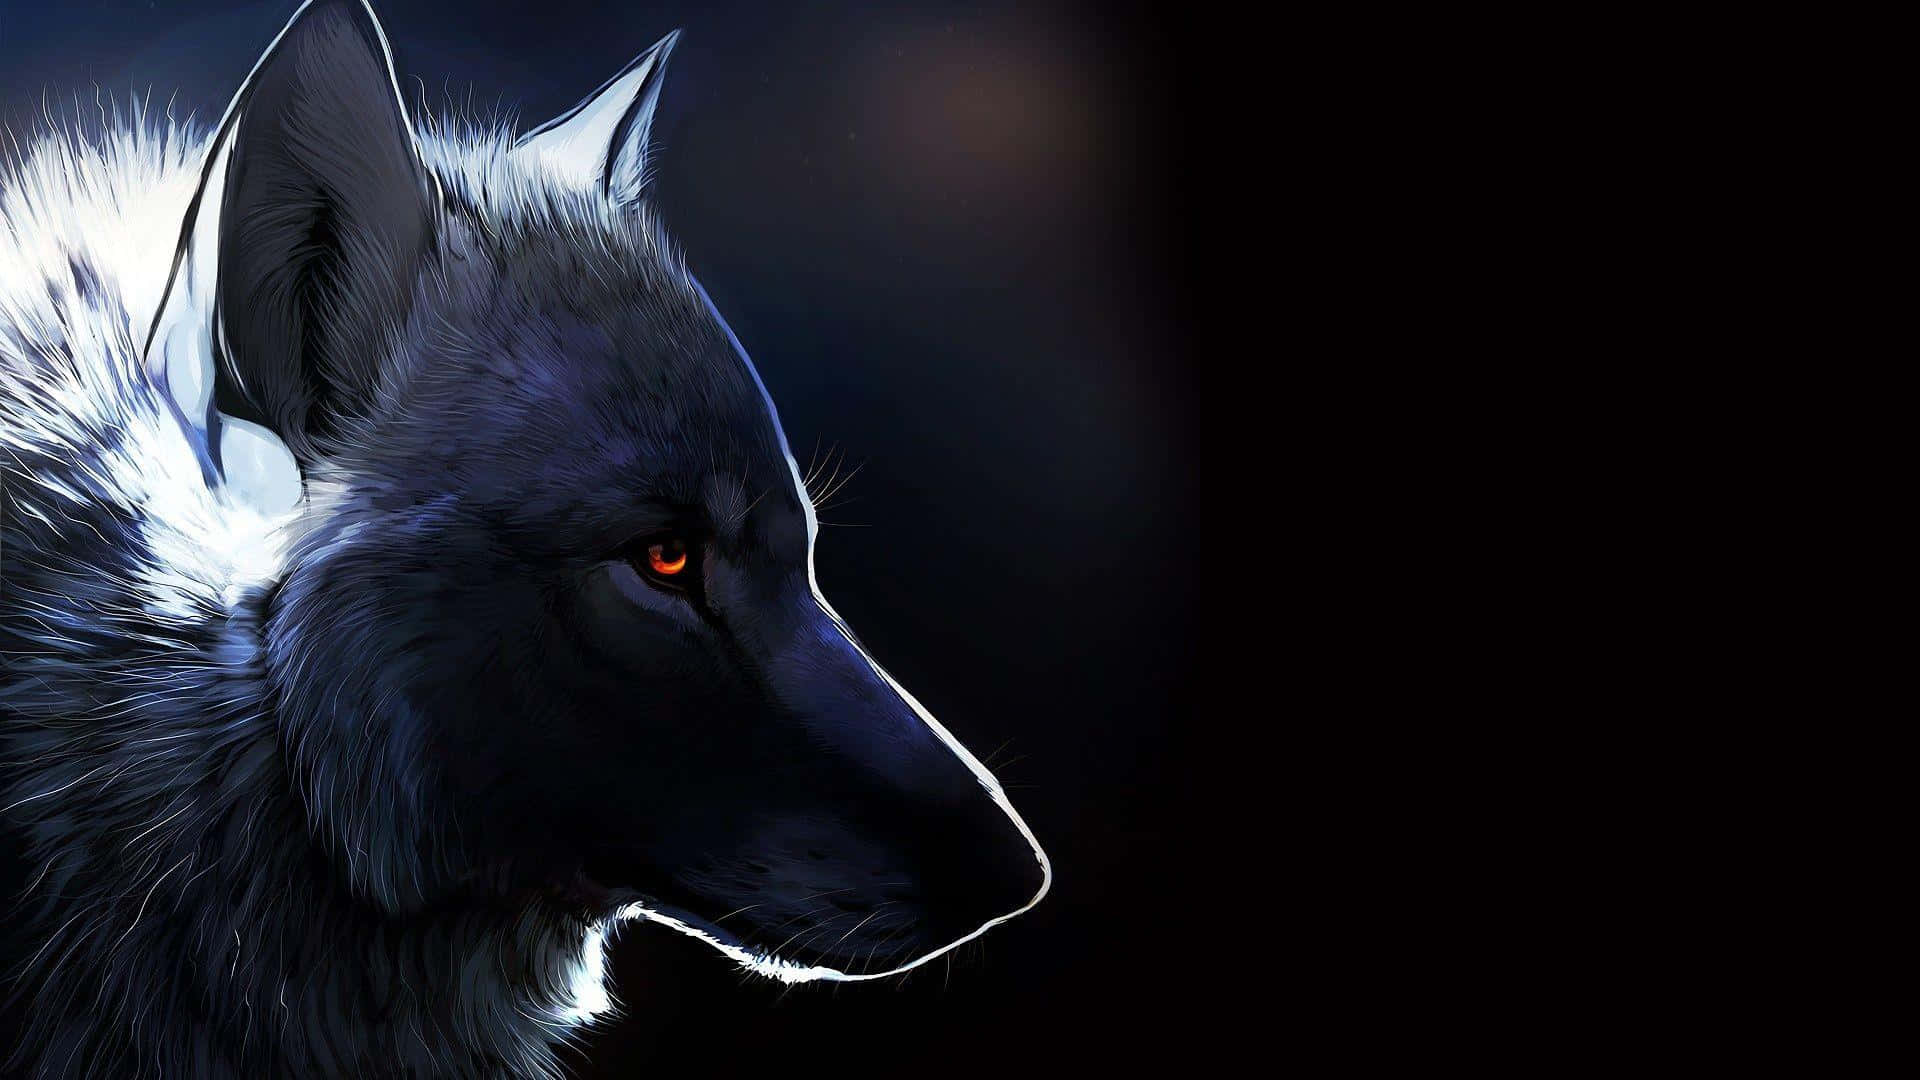 Majestic anime wolf art drawing depicting a wolf gazing ahead with a calm confidence. Wallpaper